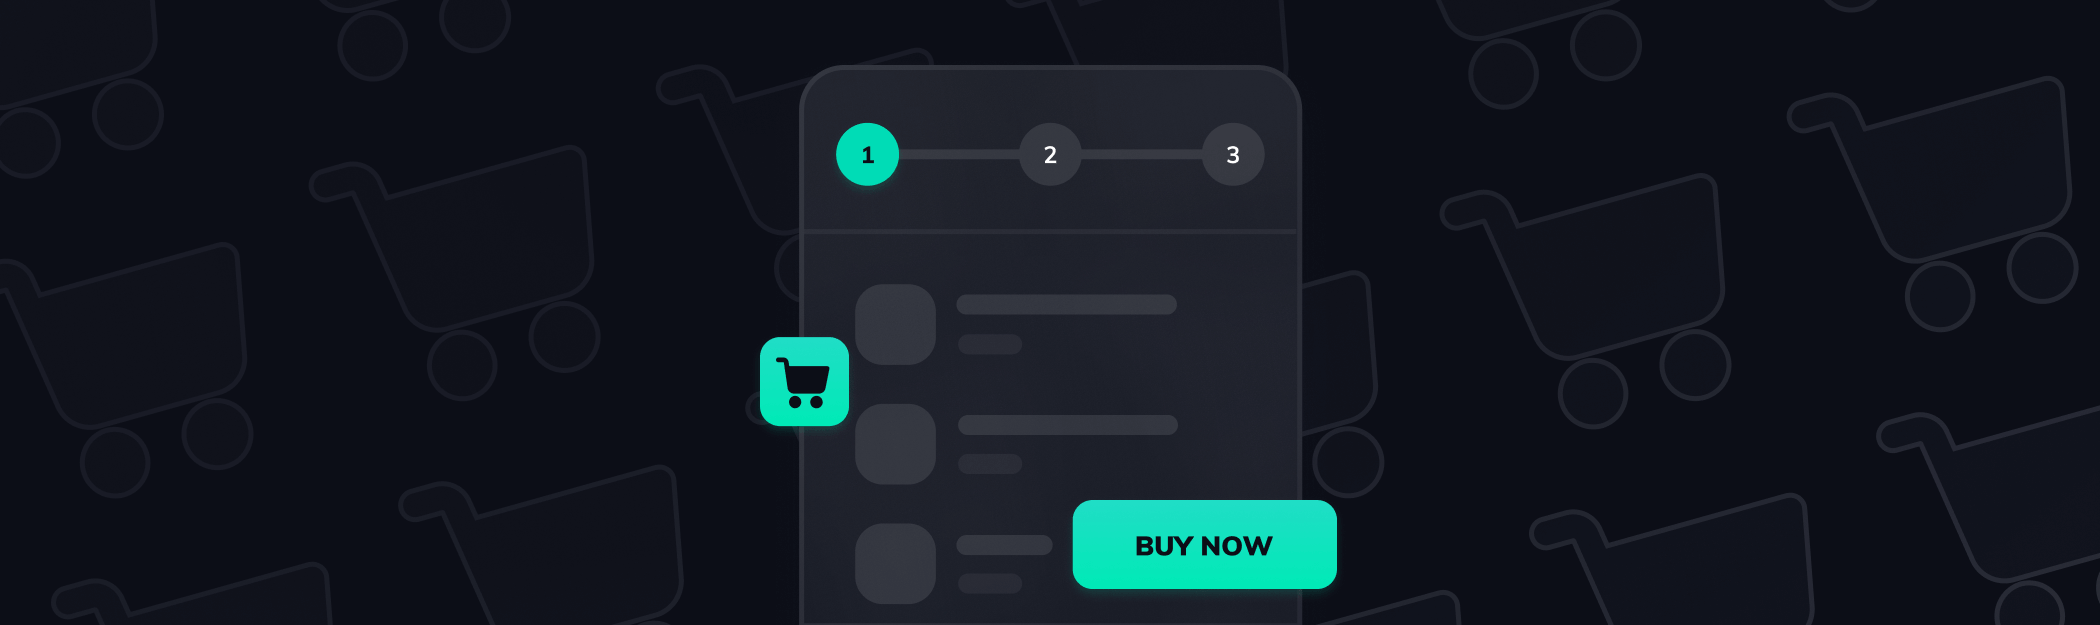 How to Optimize Checkout User Experience (UX) For Conversion